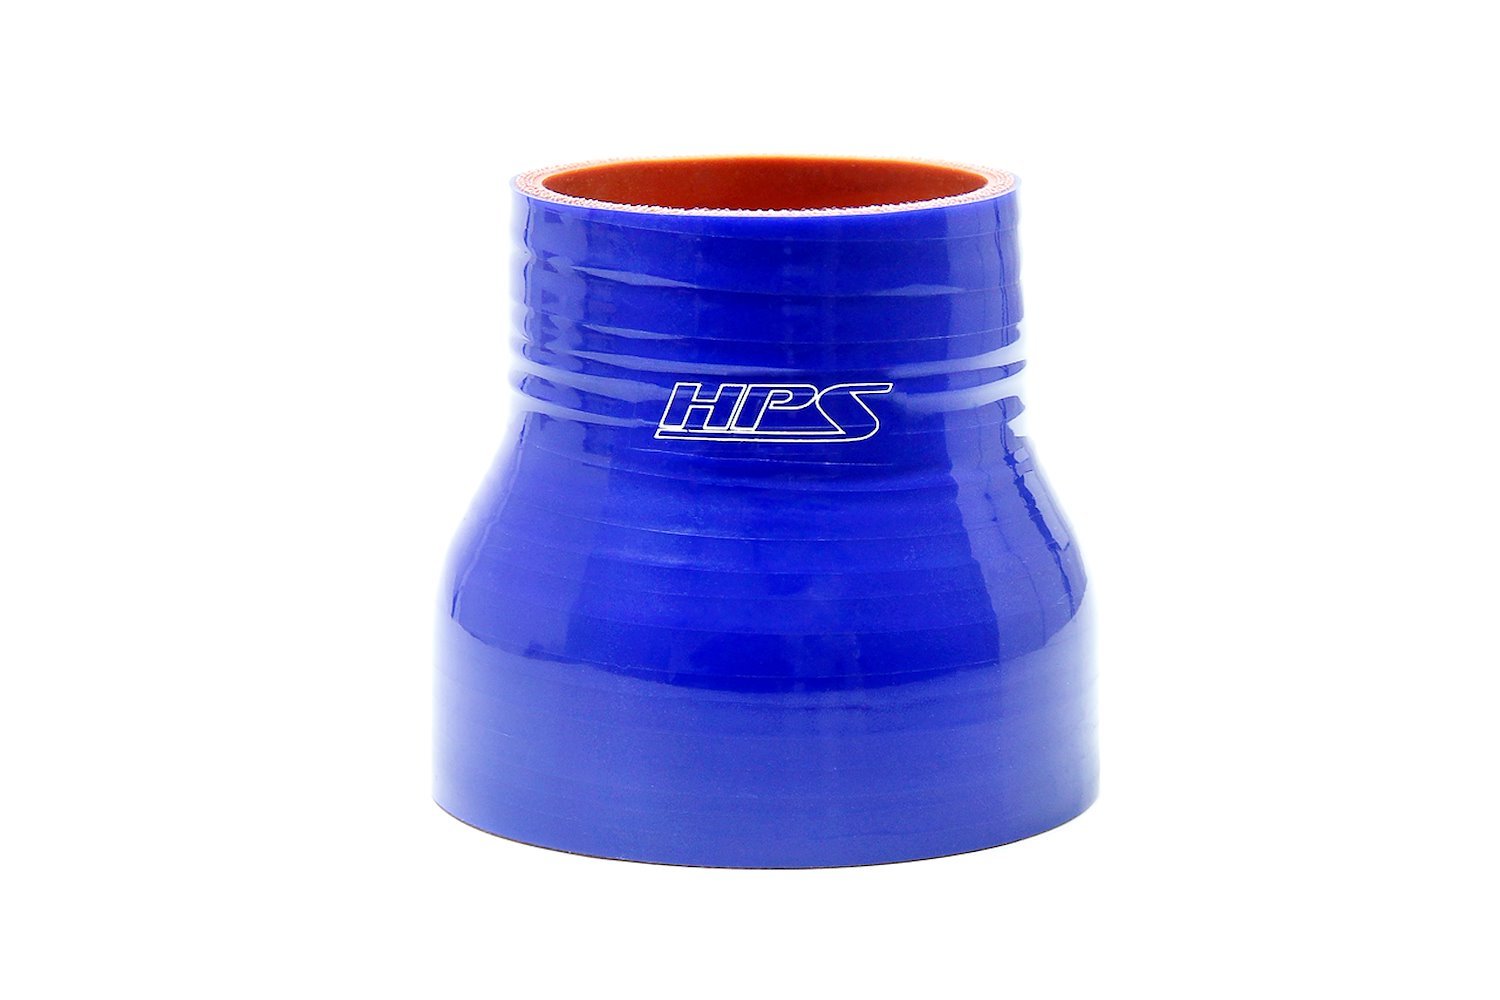 HTSR-275-375-BLUE Silicone Reducer Hose, High-Temp 4-Ply Reinforced, 2-3/4 in. - 3-3/4 in. ID, 3 in. Long, Blue